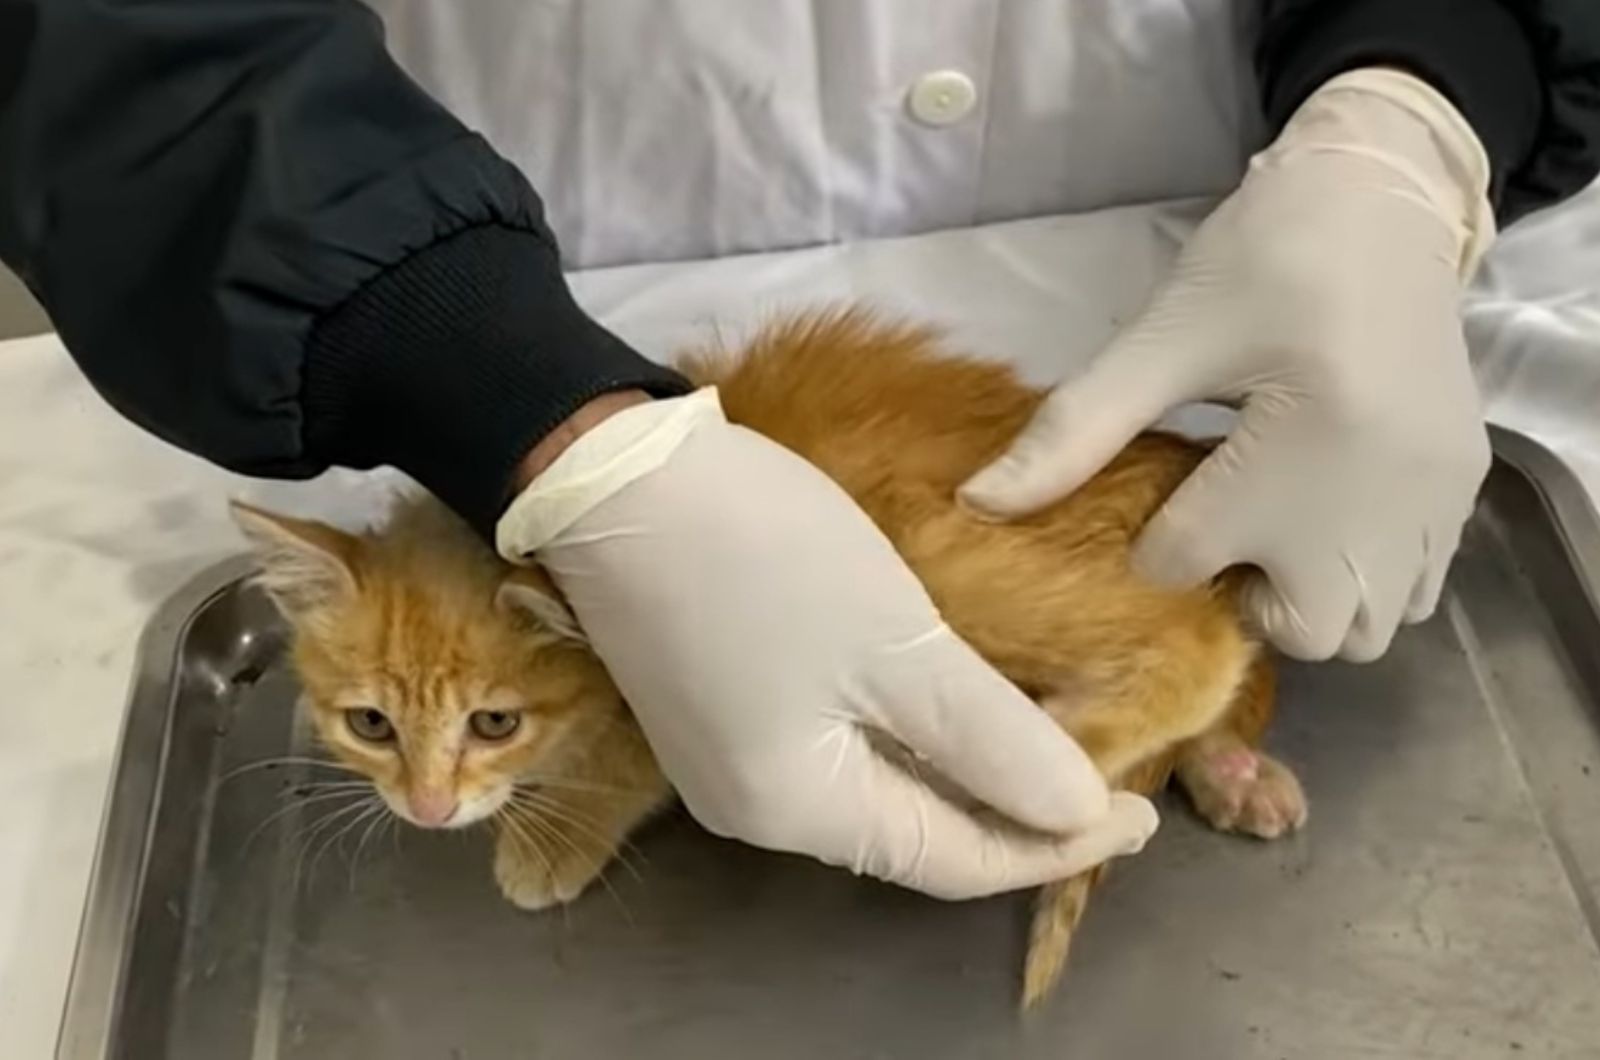 cat getting examined